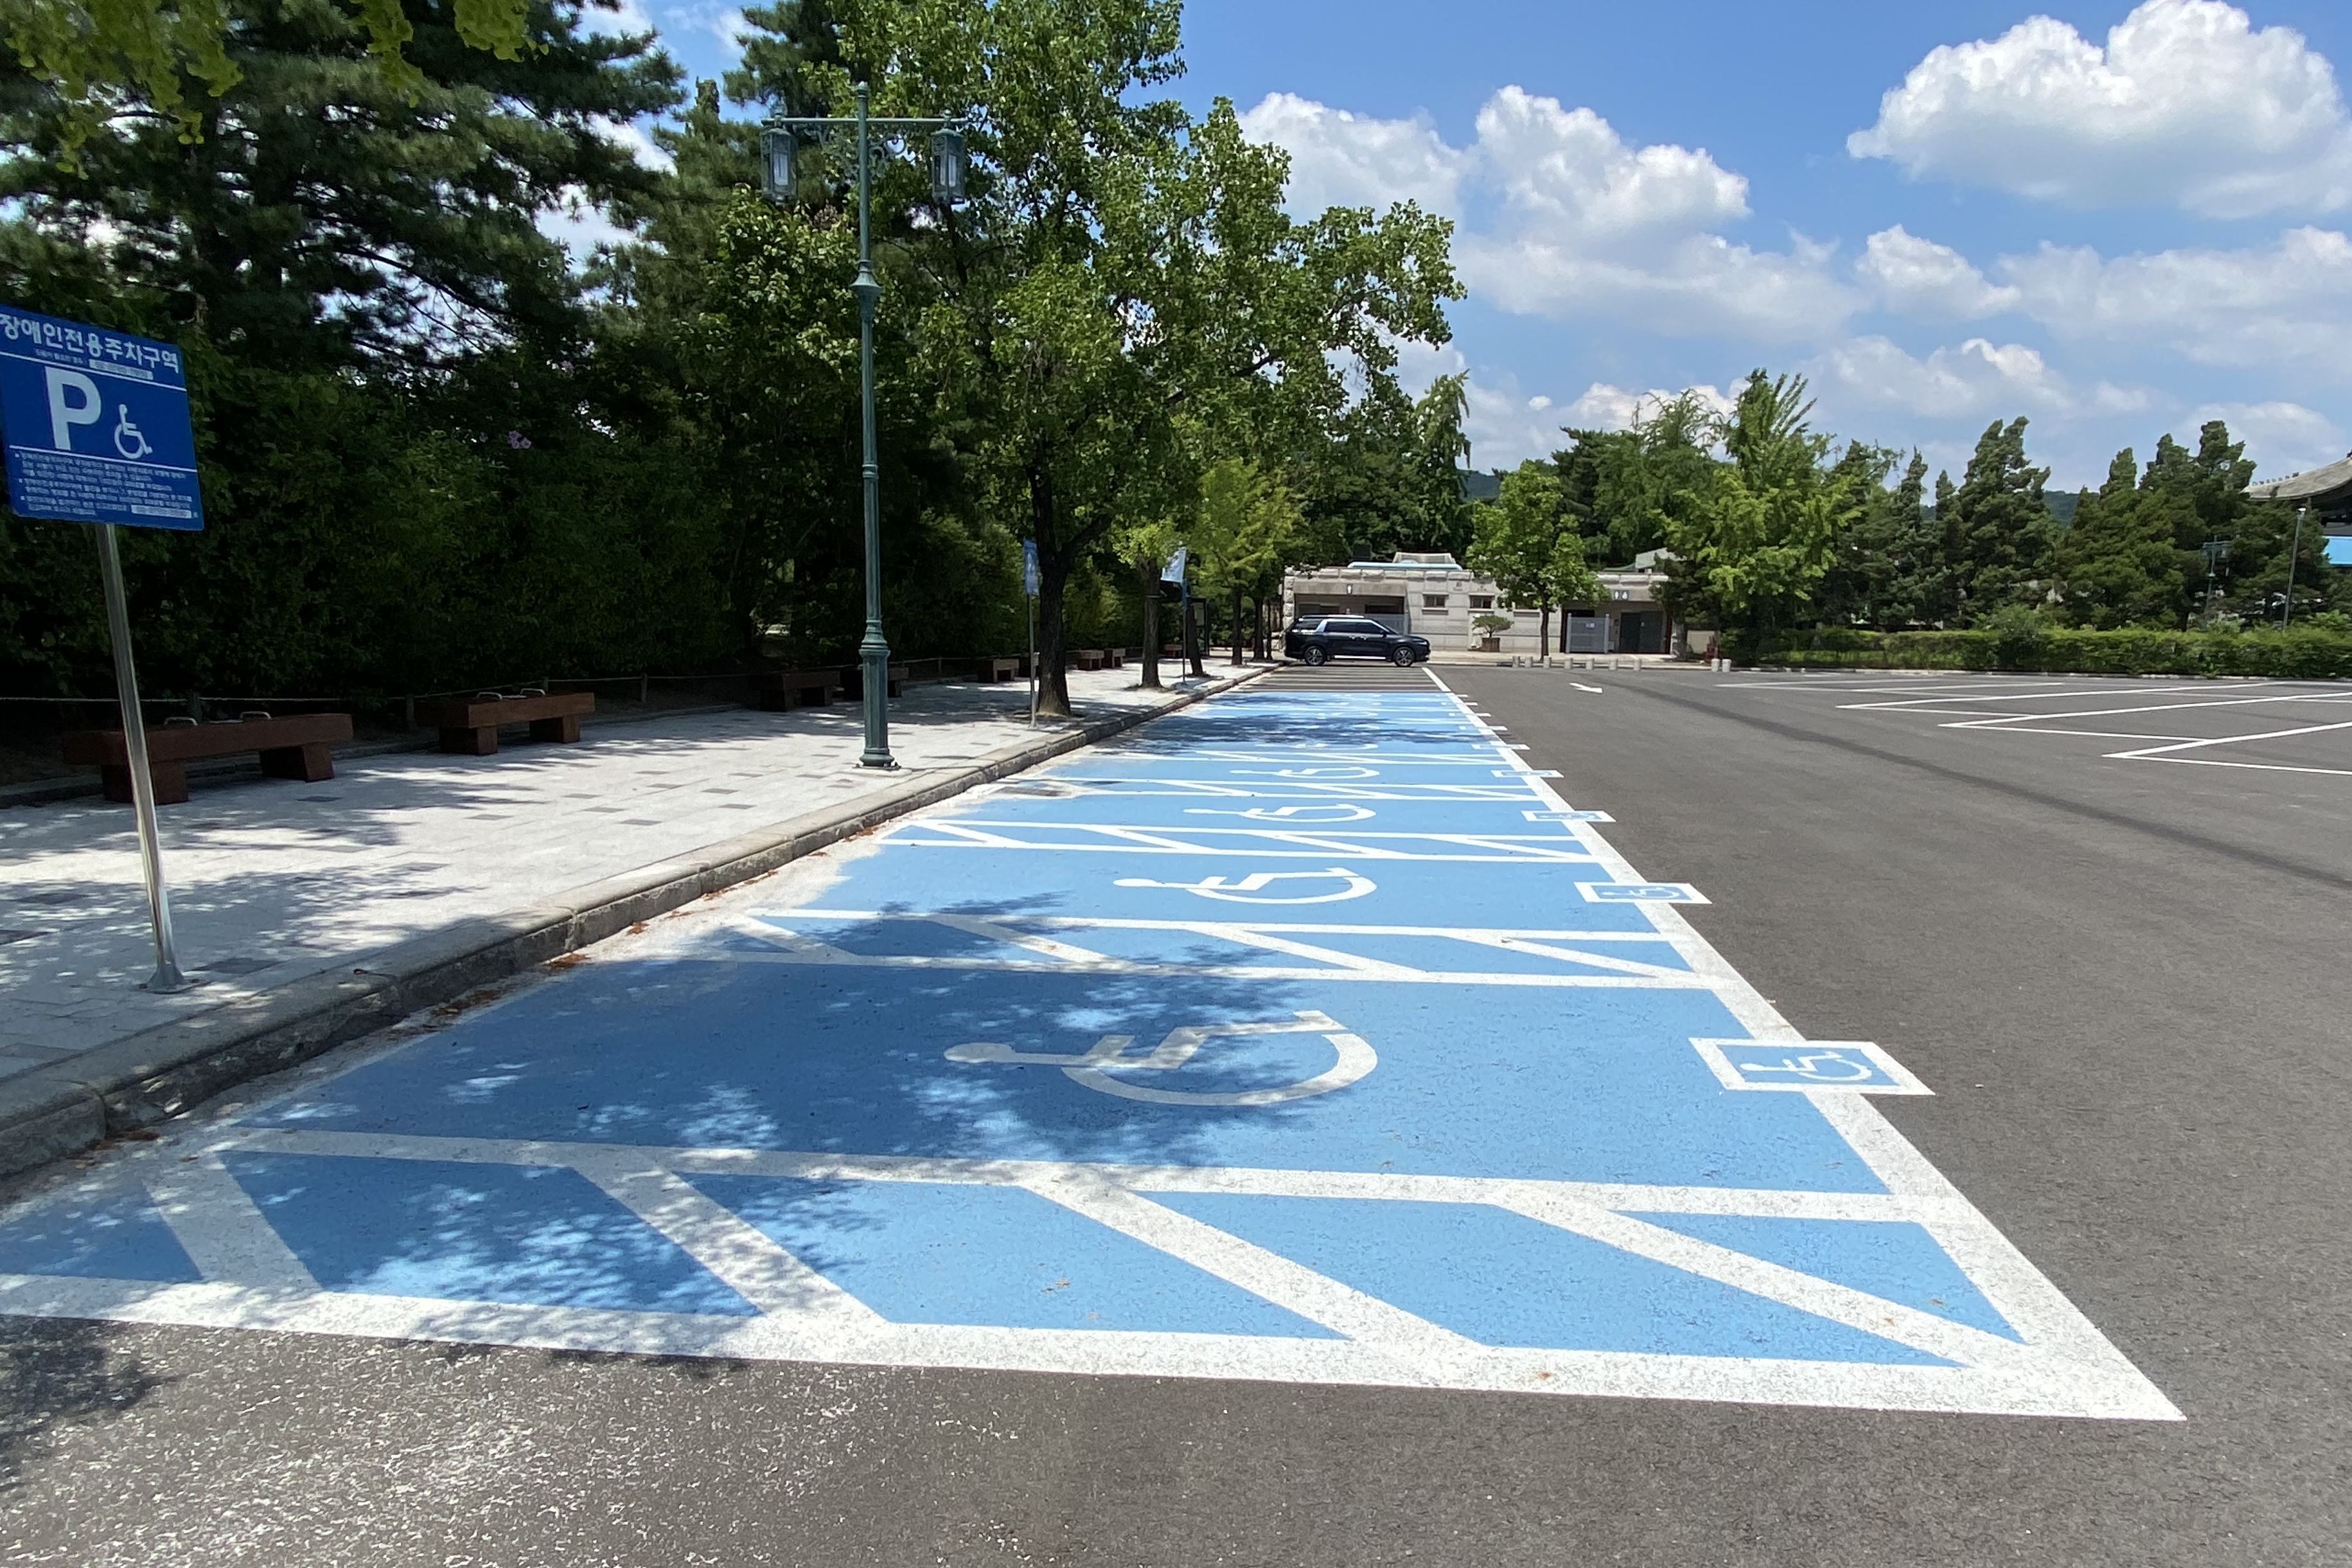 Parking facilities for persons with disabilities0 : Outdoor accessible parking lots with hatched lines